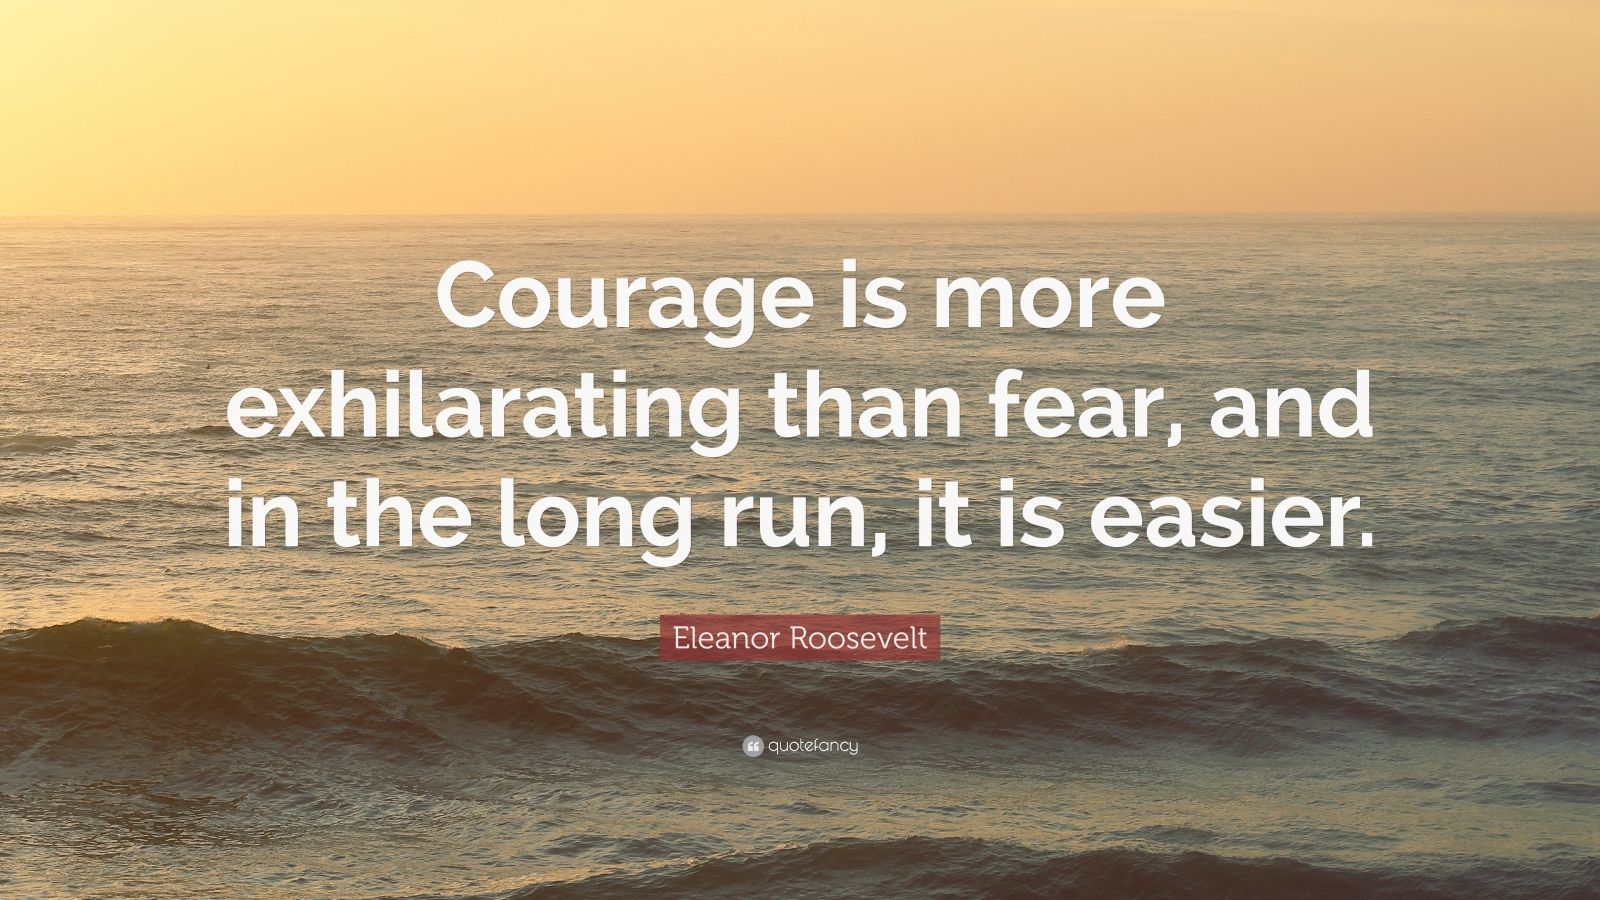 Eleanor Roosevelt Quote: “Courage is more exhilarating than fear, and ...